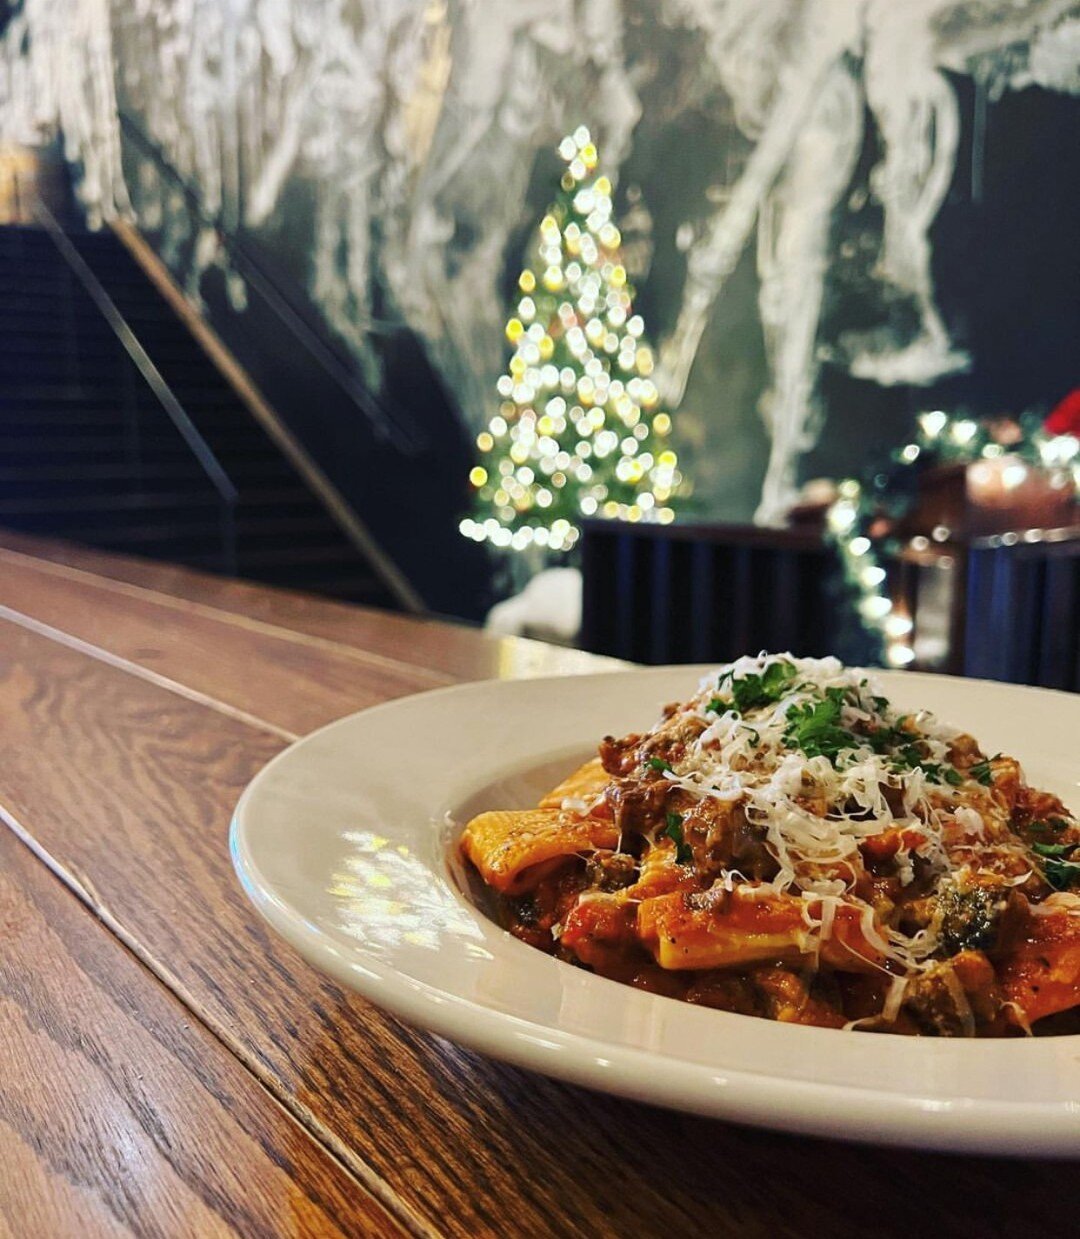 Authentic classics. That&rsquo;s Winter in Canandaigua. 
.
Enjoy a warm and inviting atmosphere, small plates and craft cocktails inspired by international food. @viveferona is Canandaigua&rsquo;s home of handcrafted Spanish tapas and family plates. 